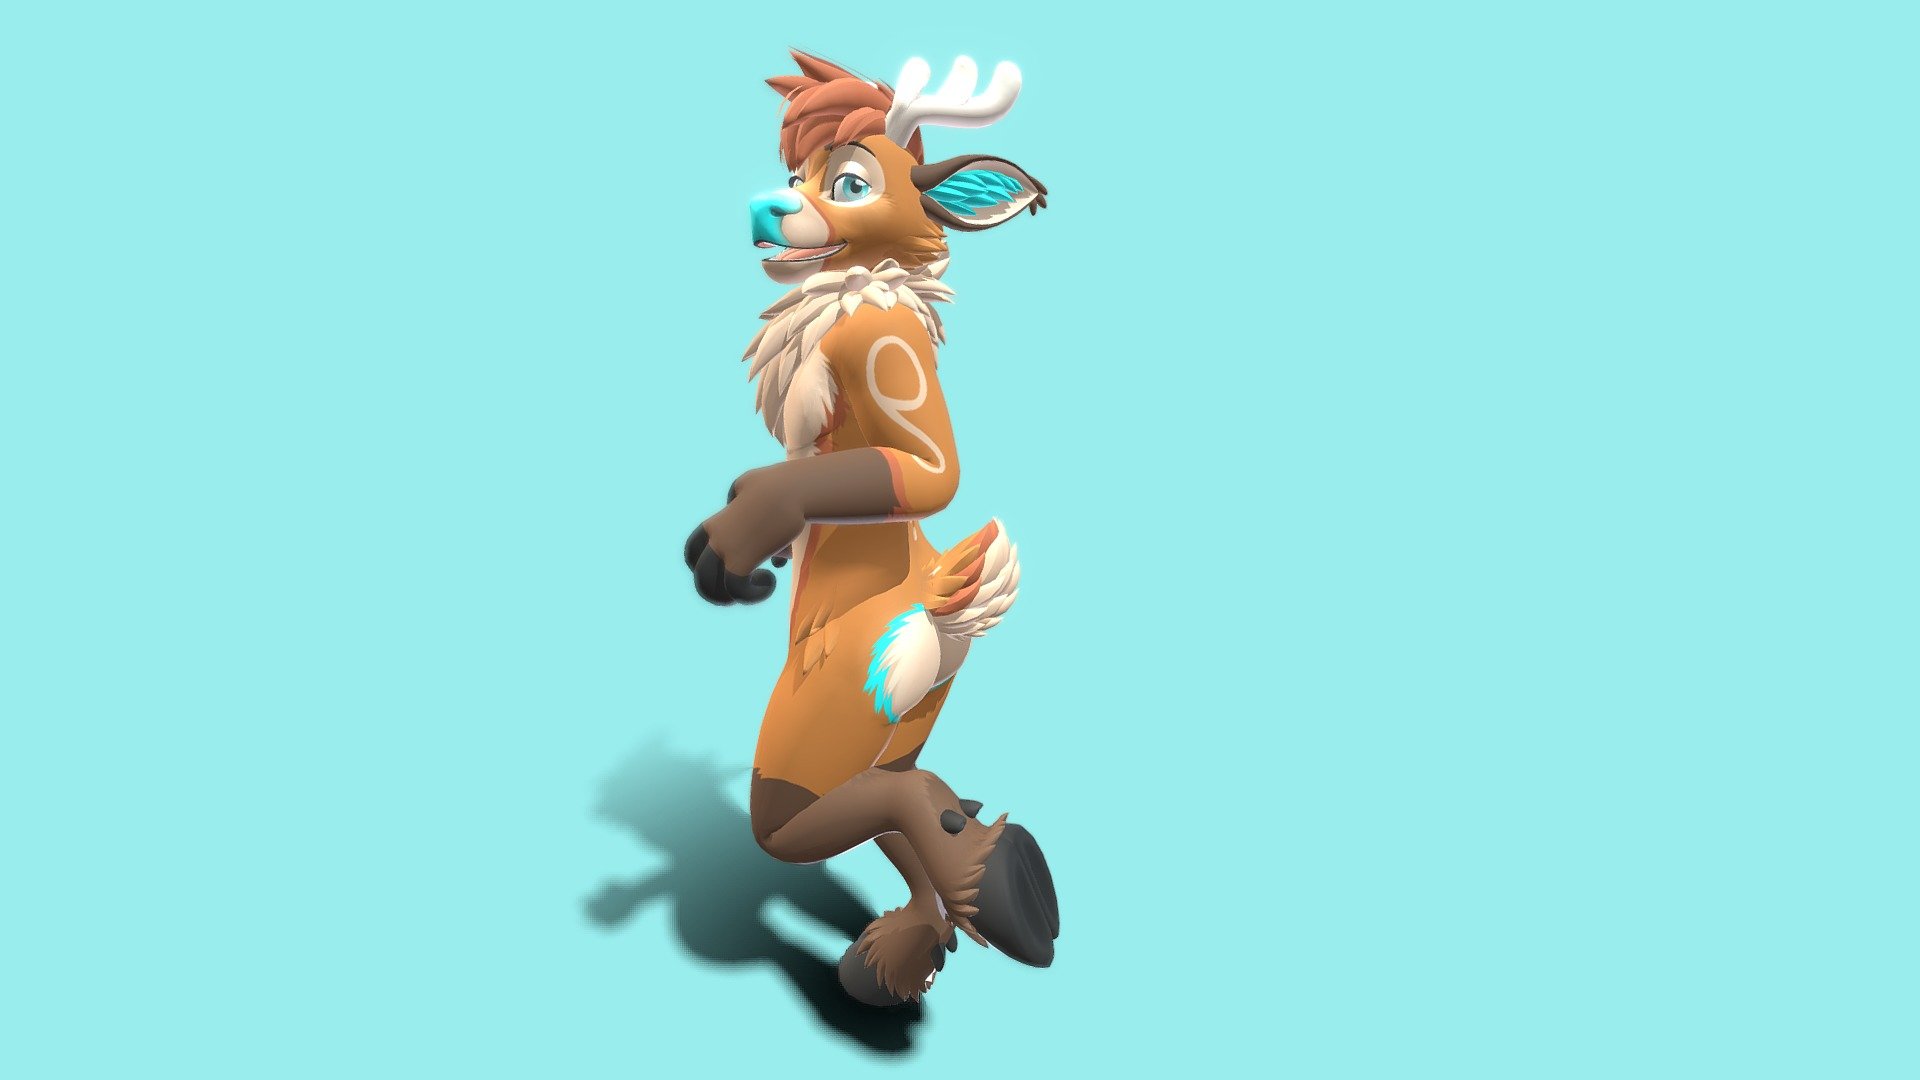 A VR avatar made for Rho the deer! Includes an outfit and accessories, body and face emotes :)

Mesh made in Blender, textured in SAI2

This was made as a custom commission and is not downloadable publicly. Thank you!! For custom commission status, check out my telegram channel t.me/Meelo3D - Rho VRChat Avatar - 3D model by Meelo 3d model